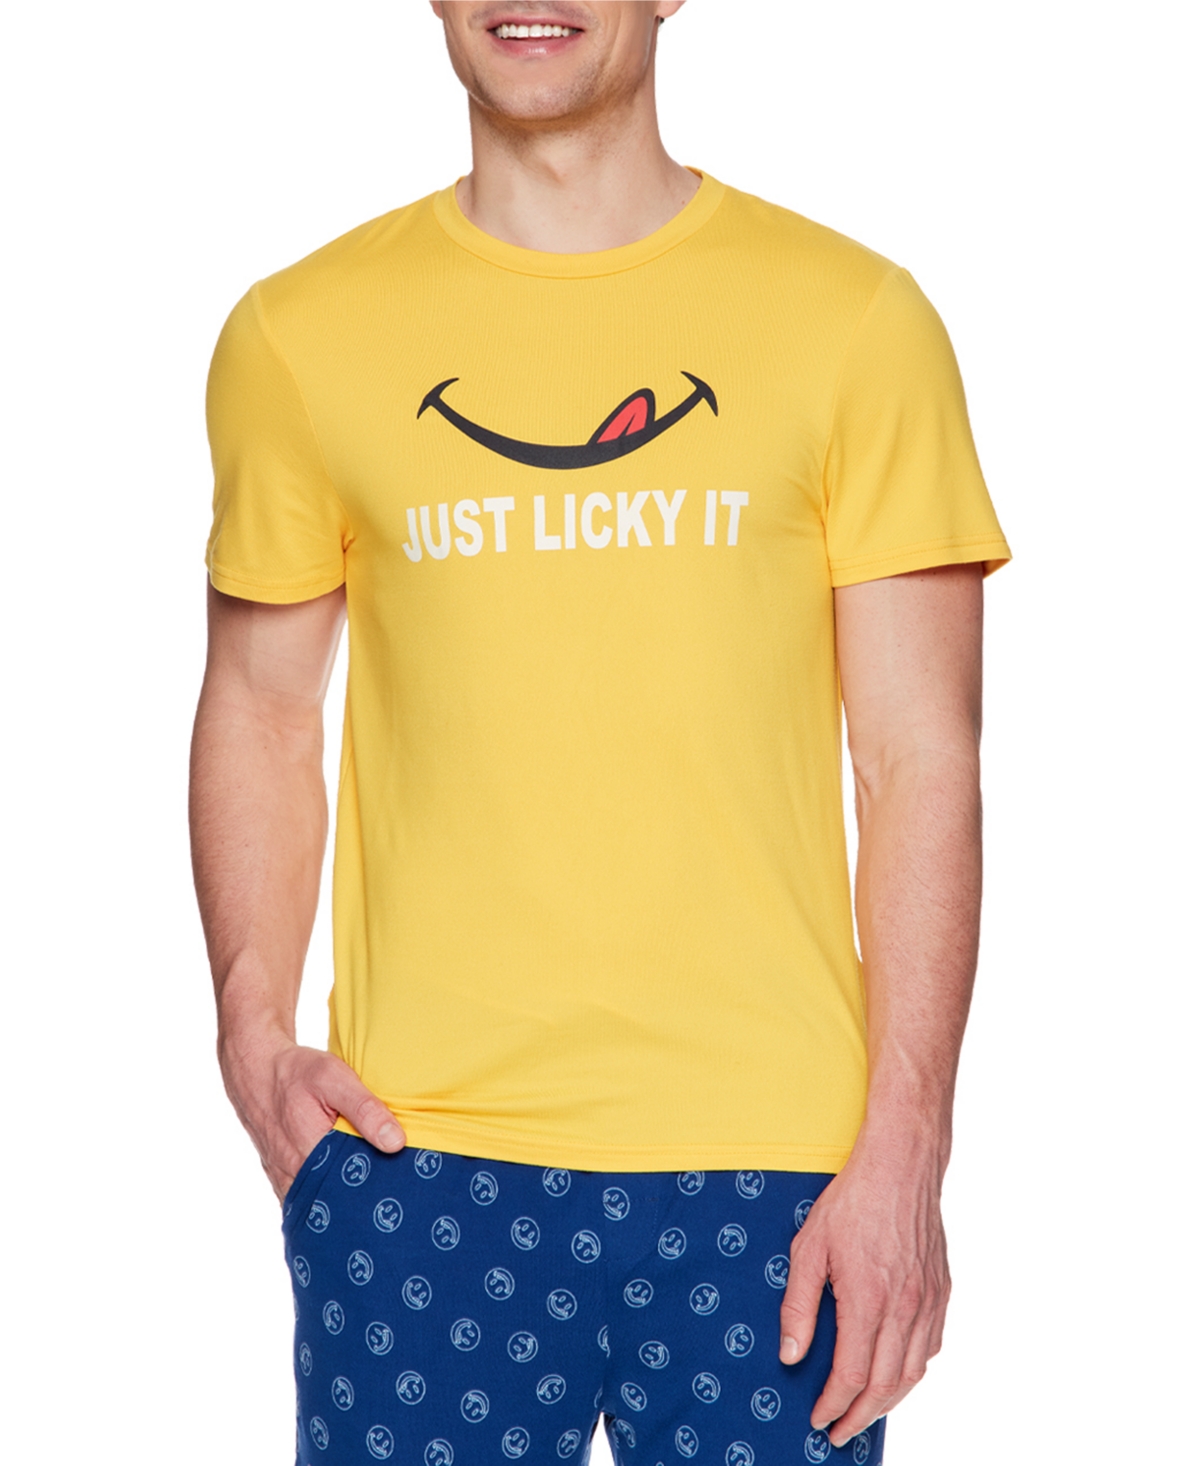 Men's Fun Just Licky It Graphic T-Shirt - Gold-Tone